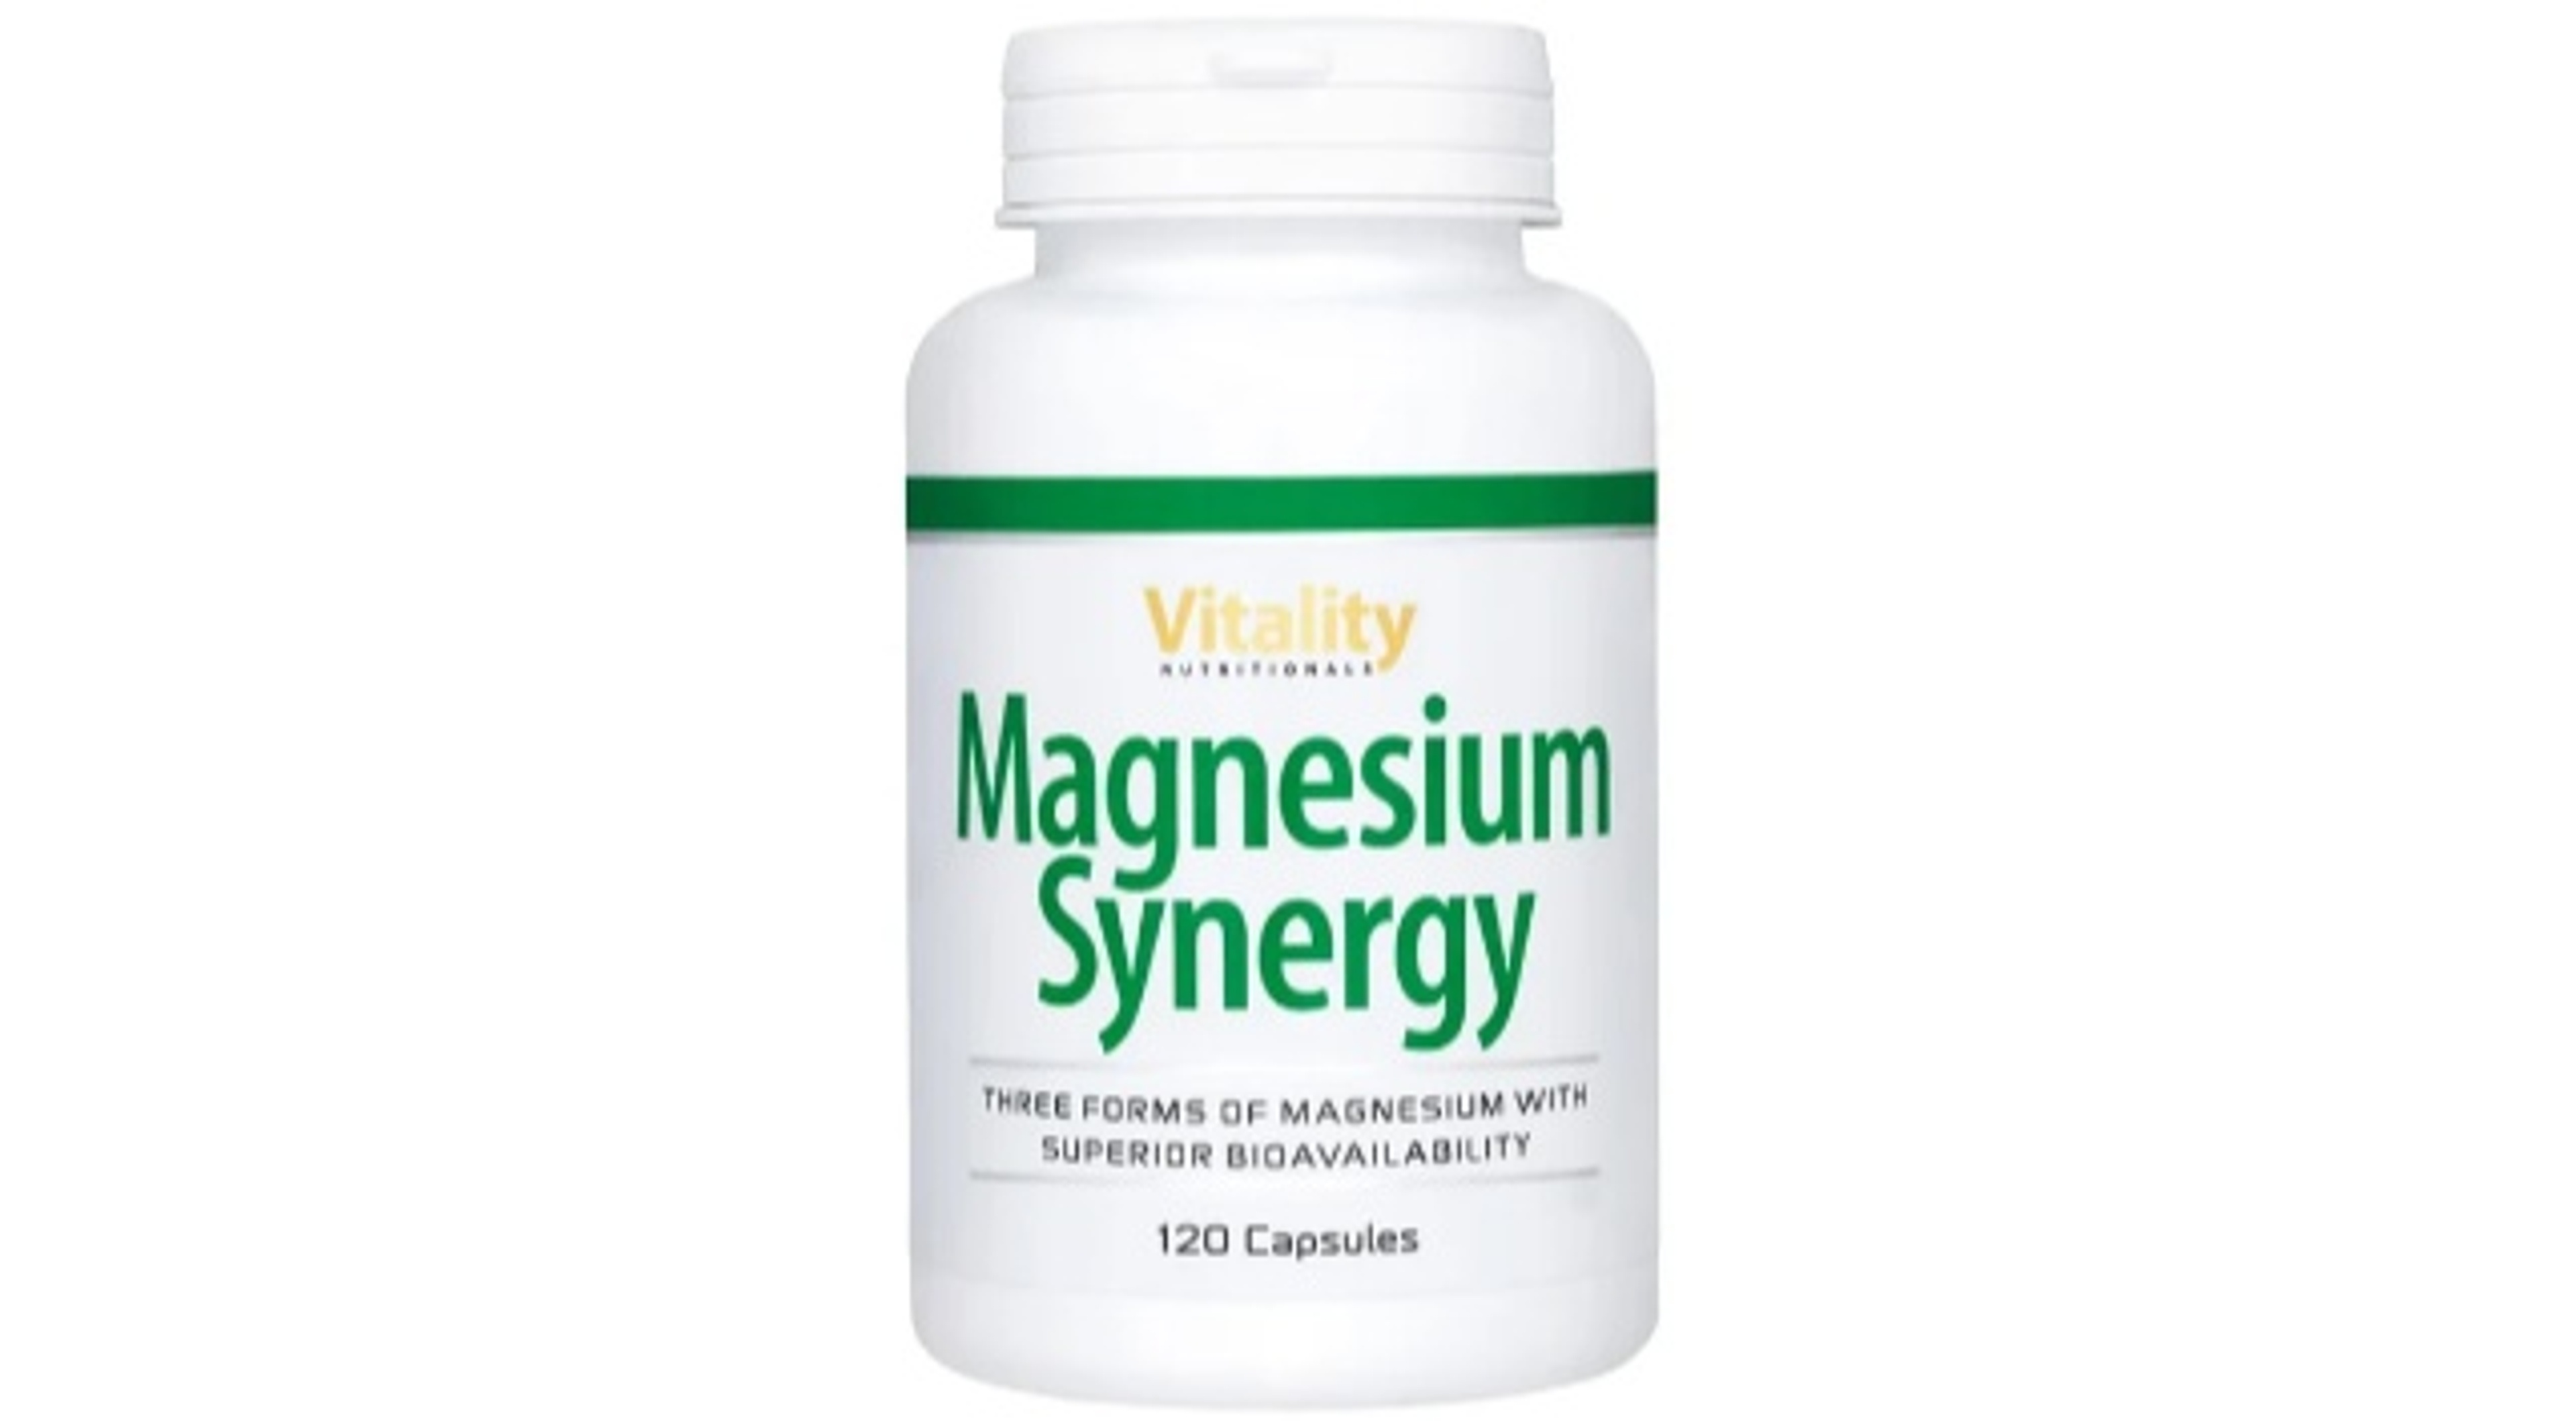 magnesium-synergy-homepage-640x353.png